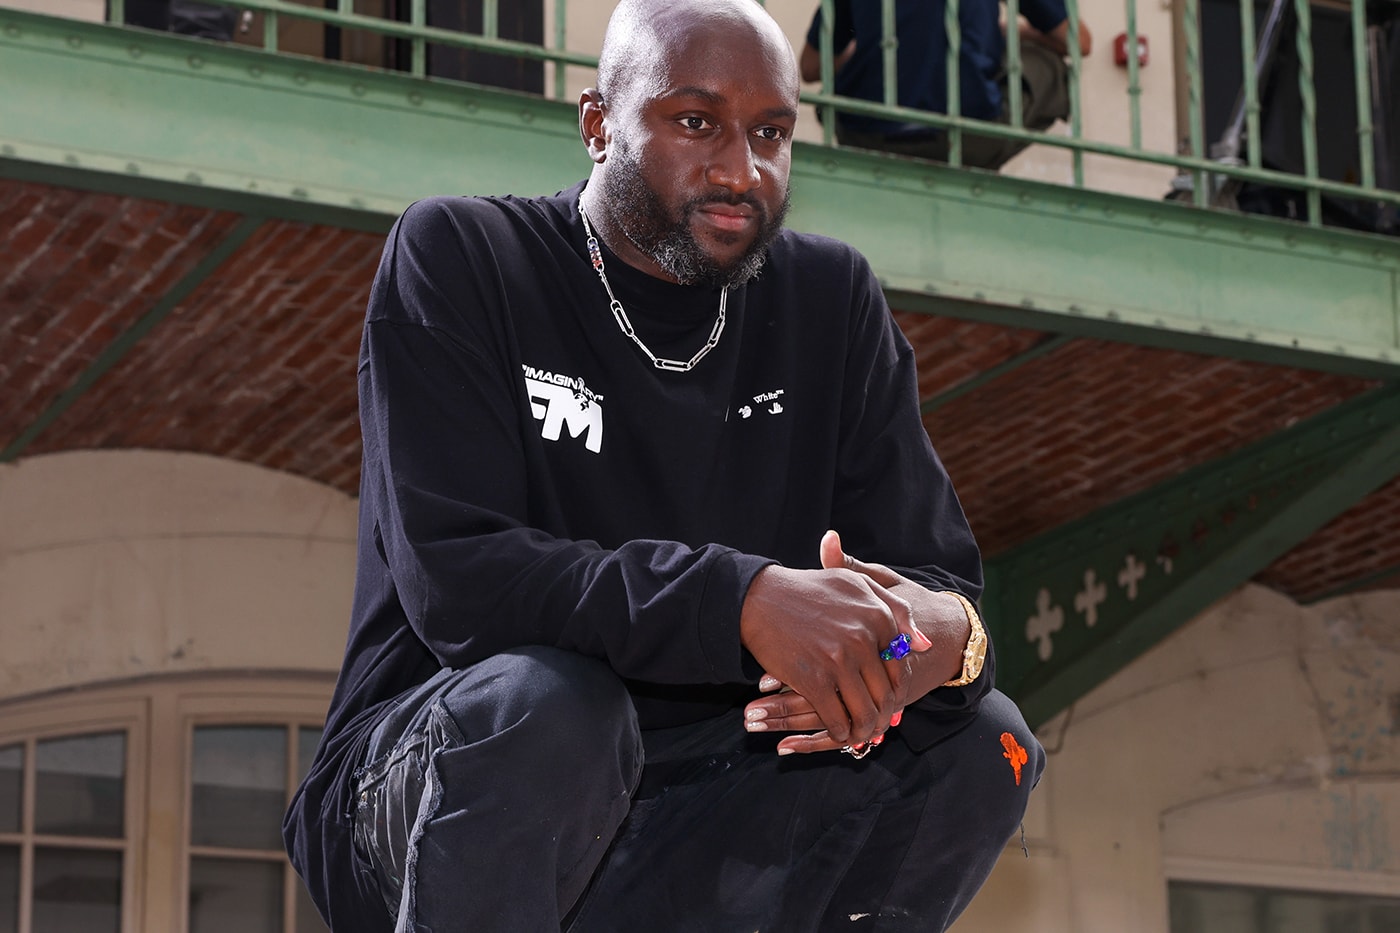 New Report Details Plans for Virgil Abloh's Off-White Following